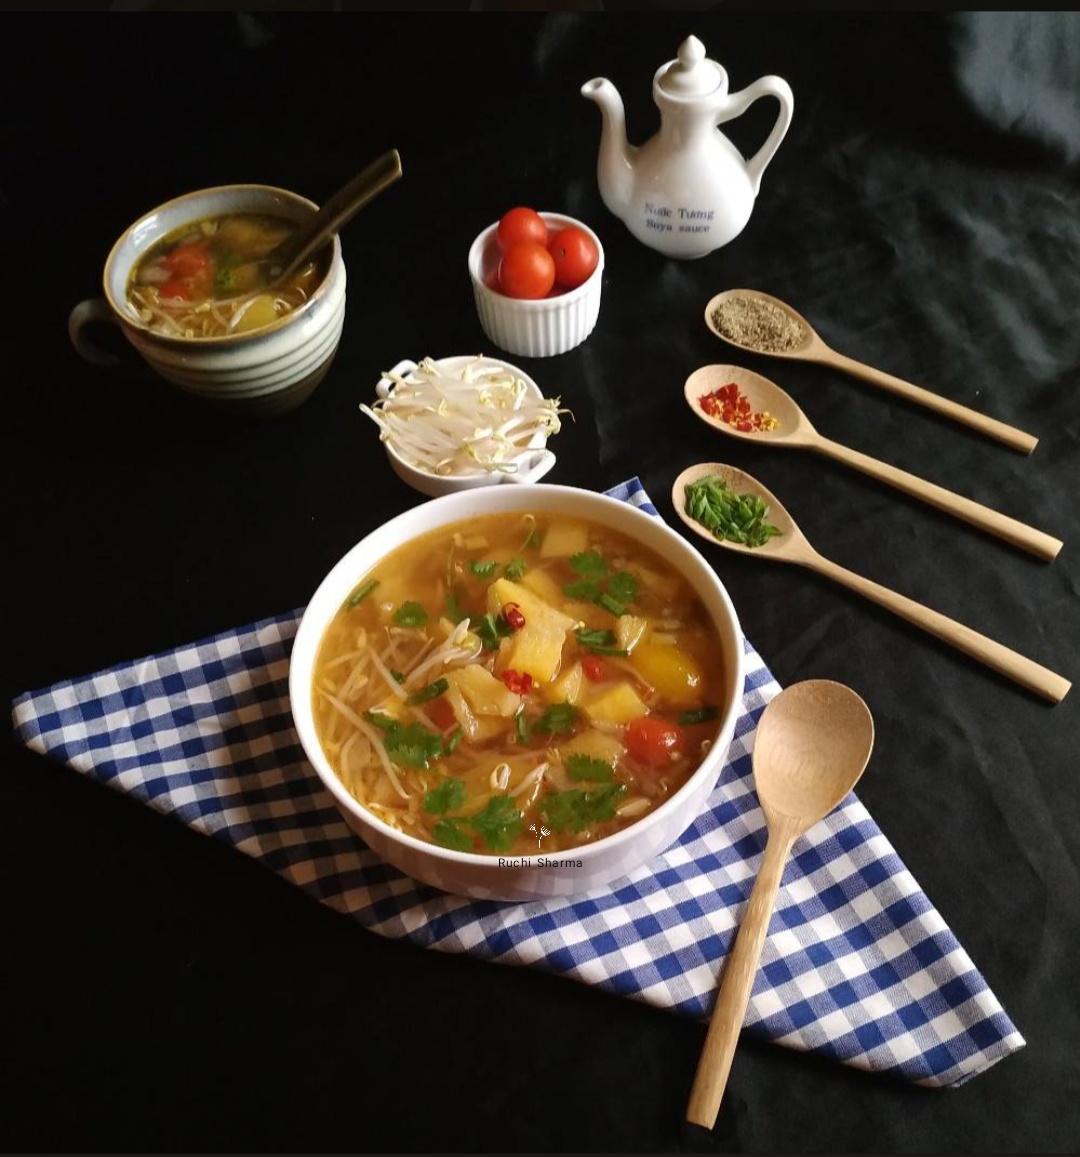 Pineapple and bean sprouts soup